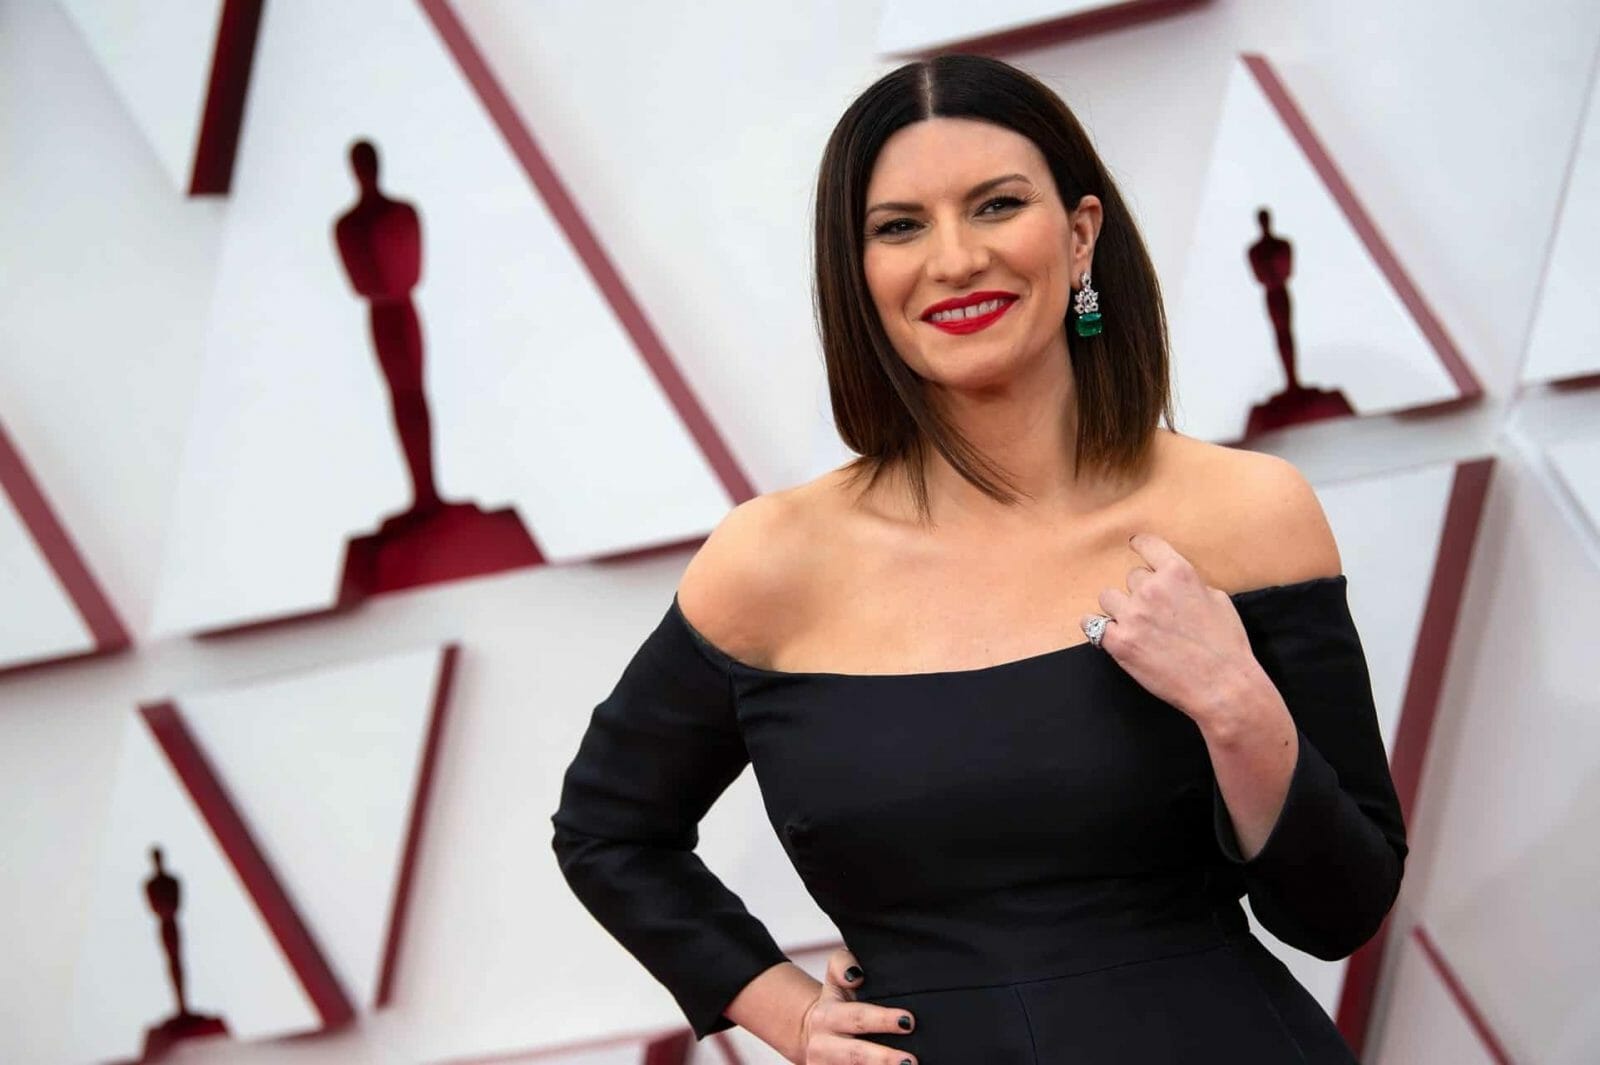 Eurovision 2022: Laura Pausini rumoured to be among the hosts - Eurovoxx